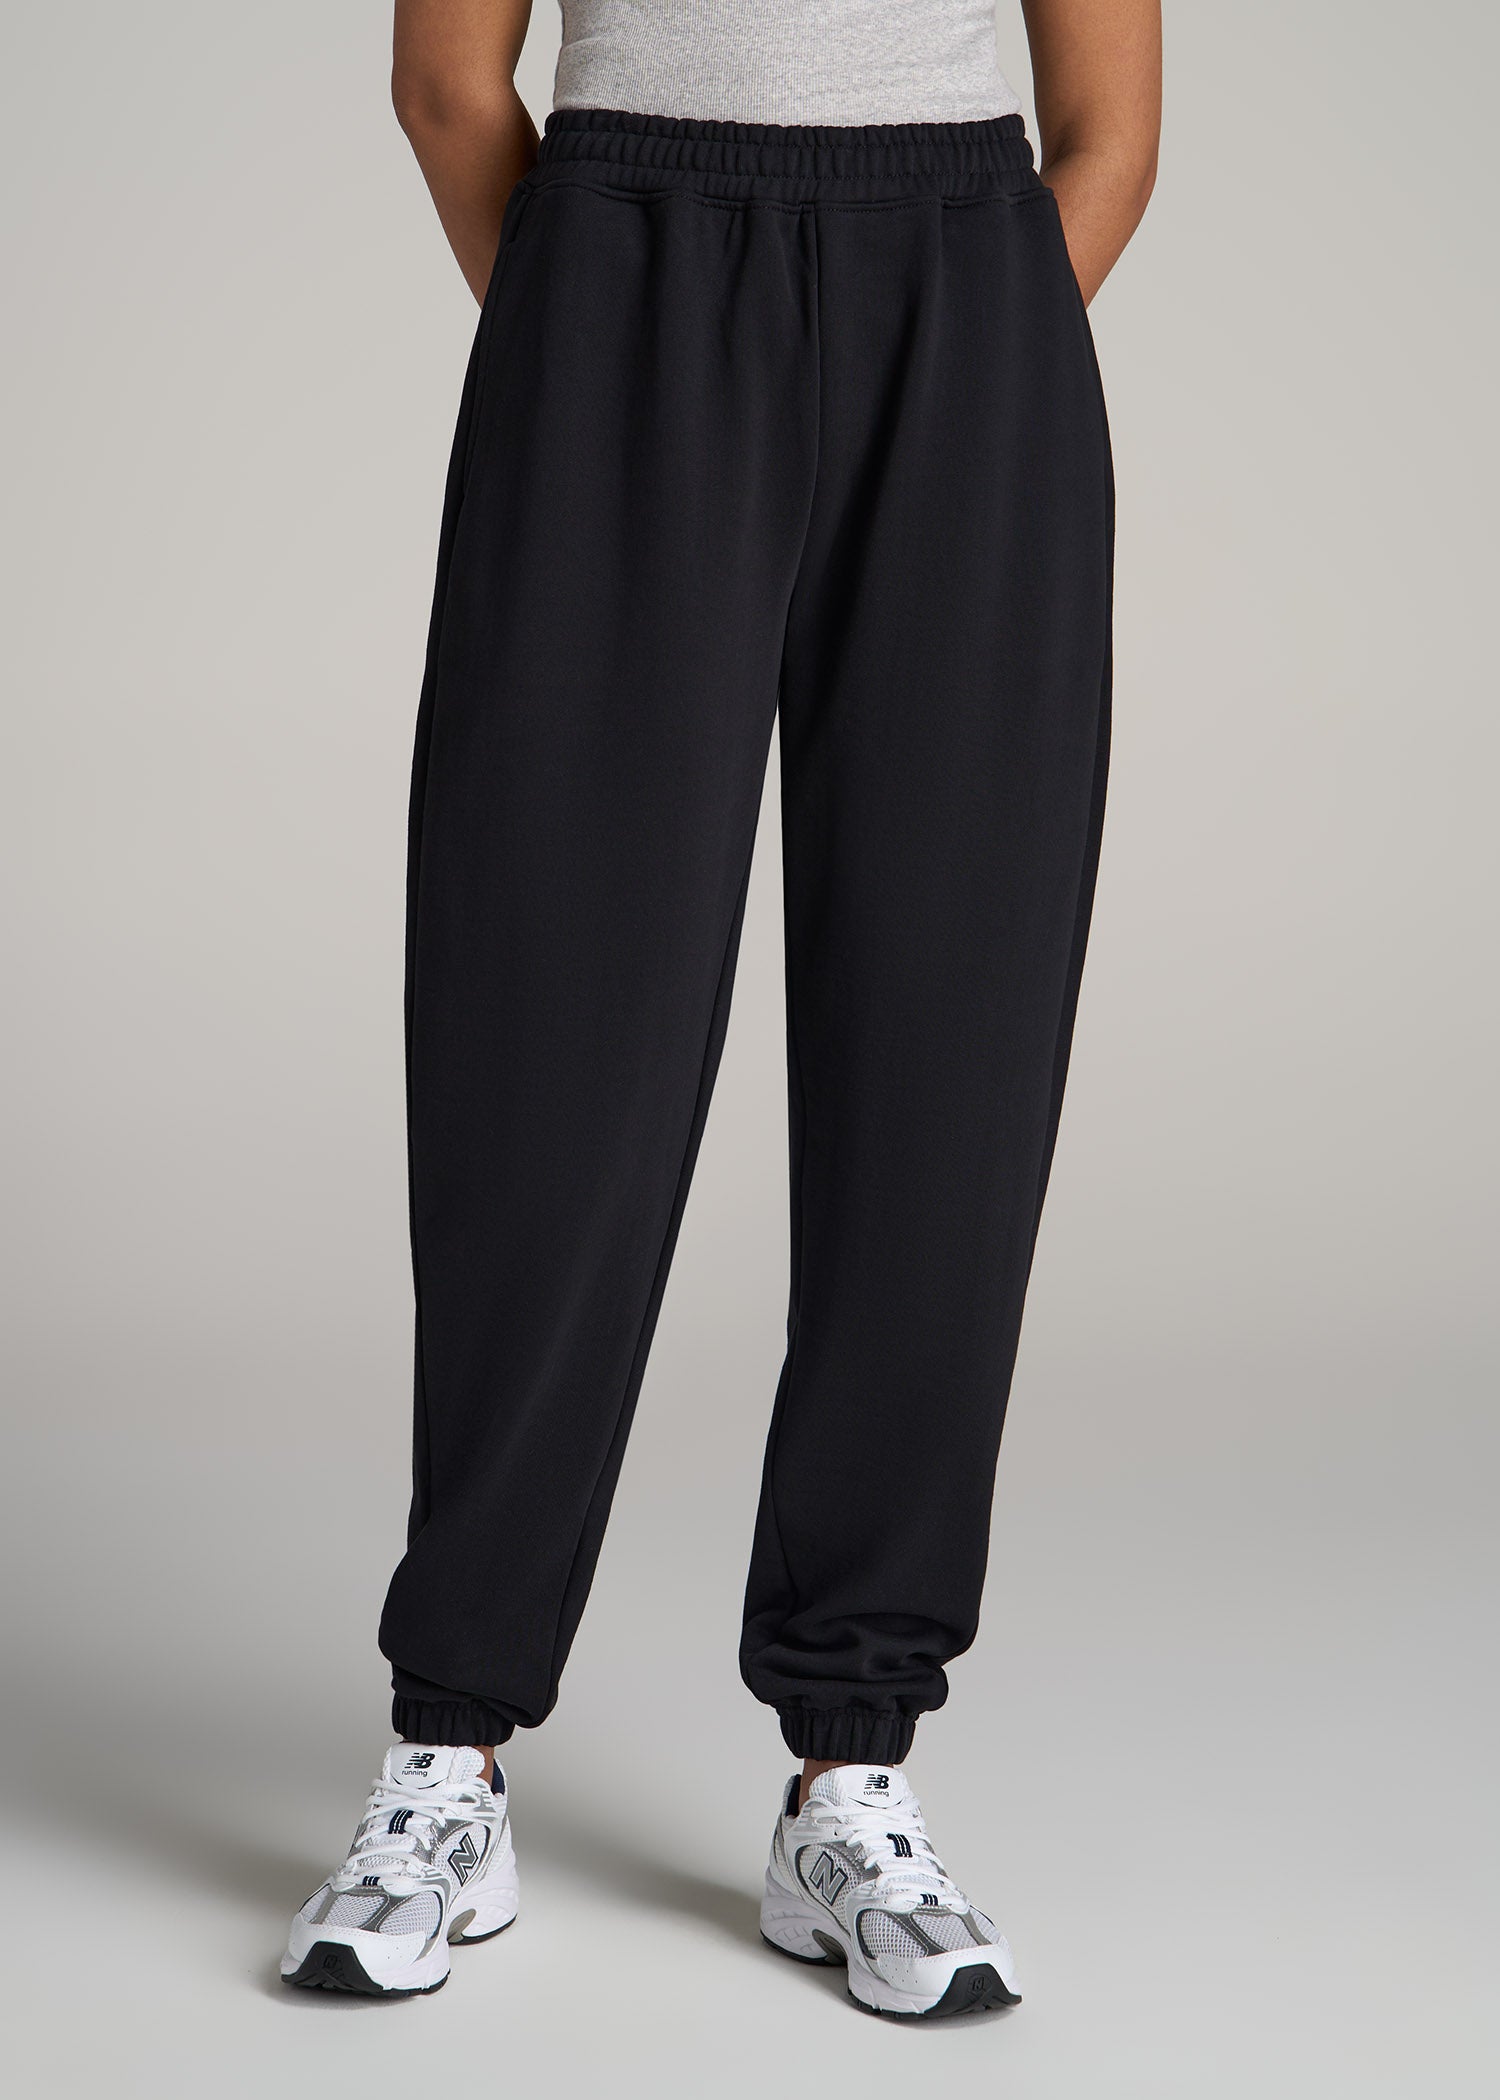 Joggers For Tall Women